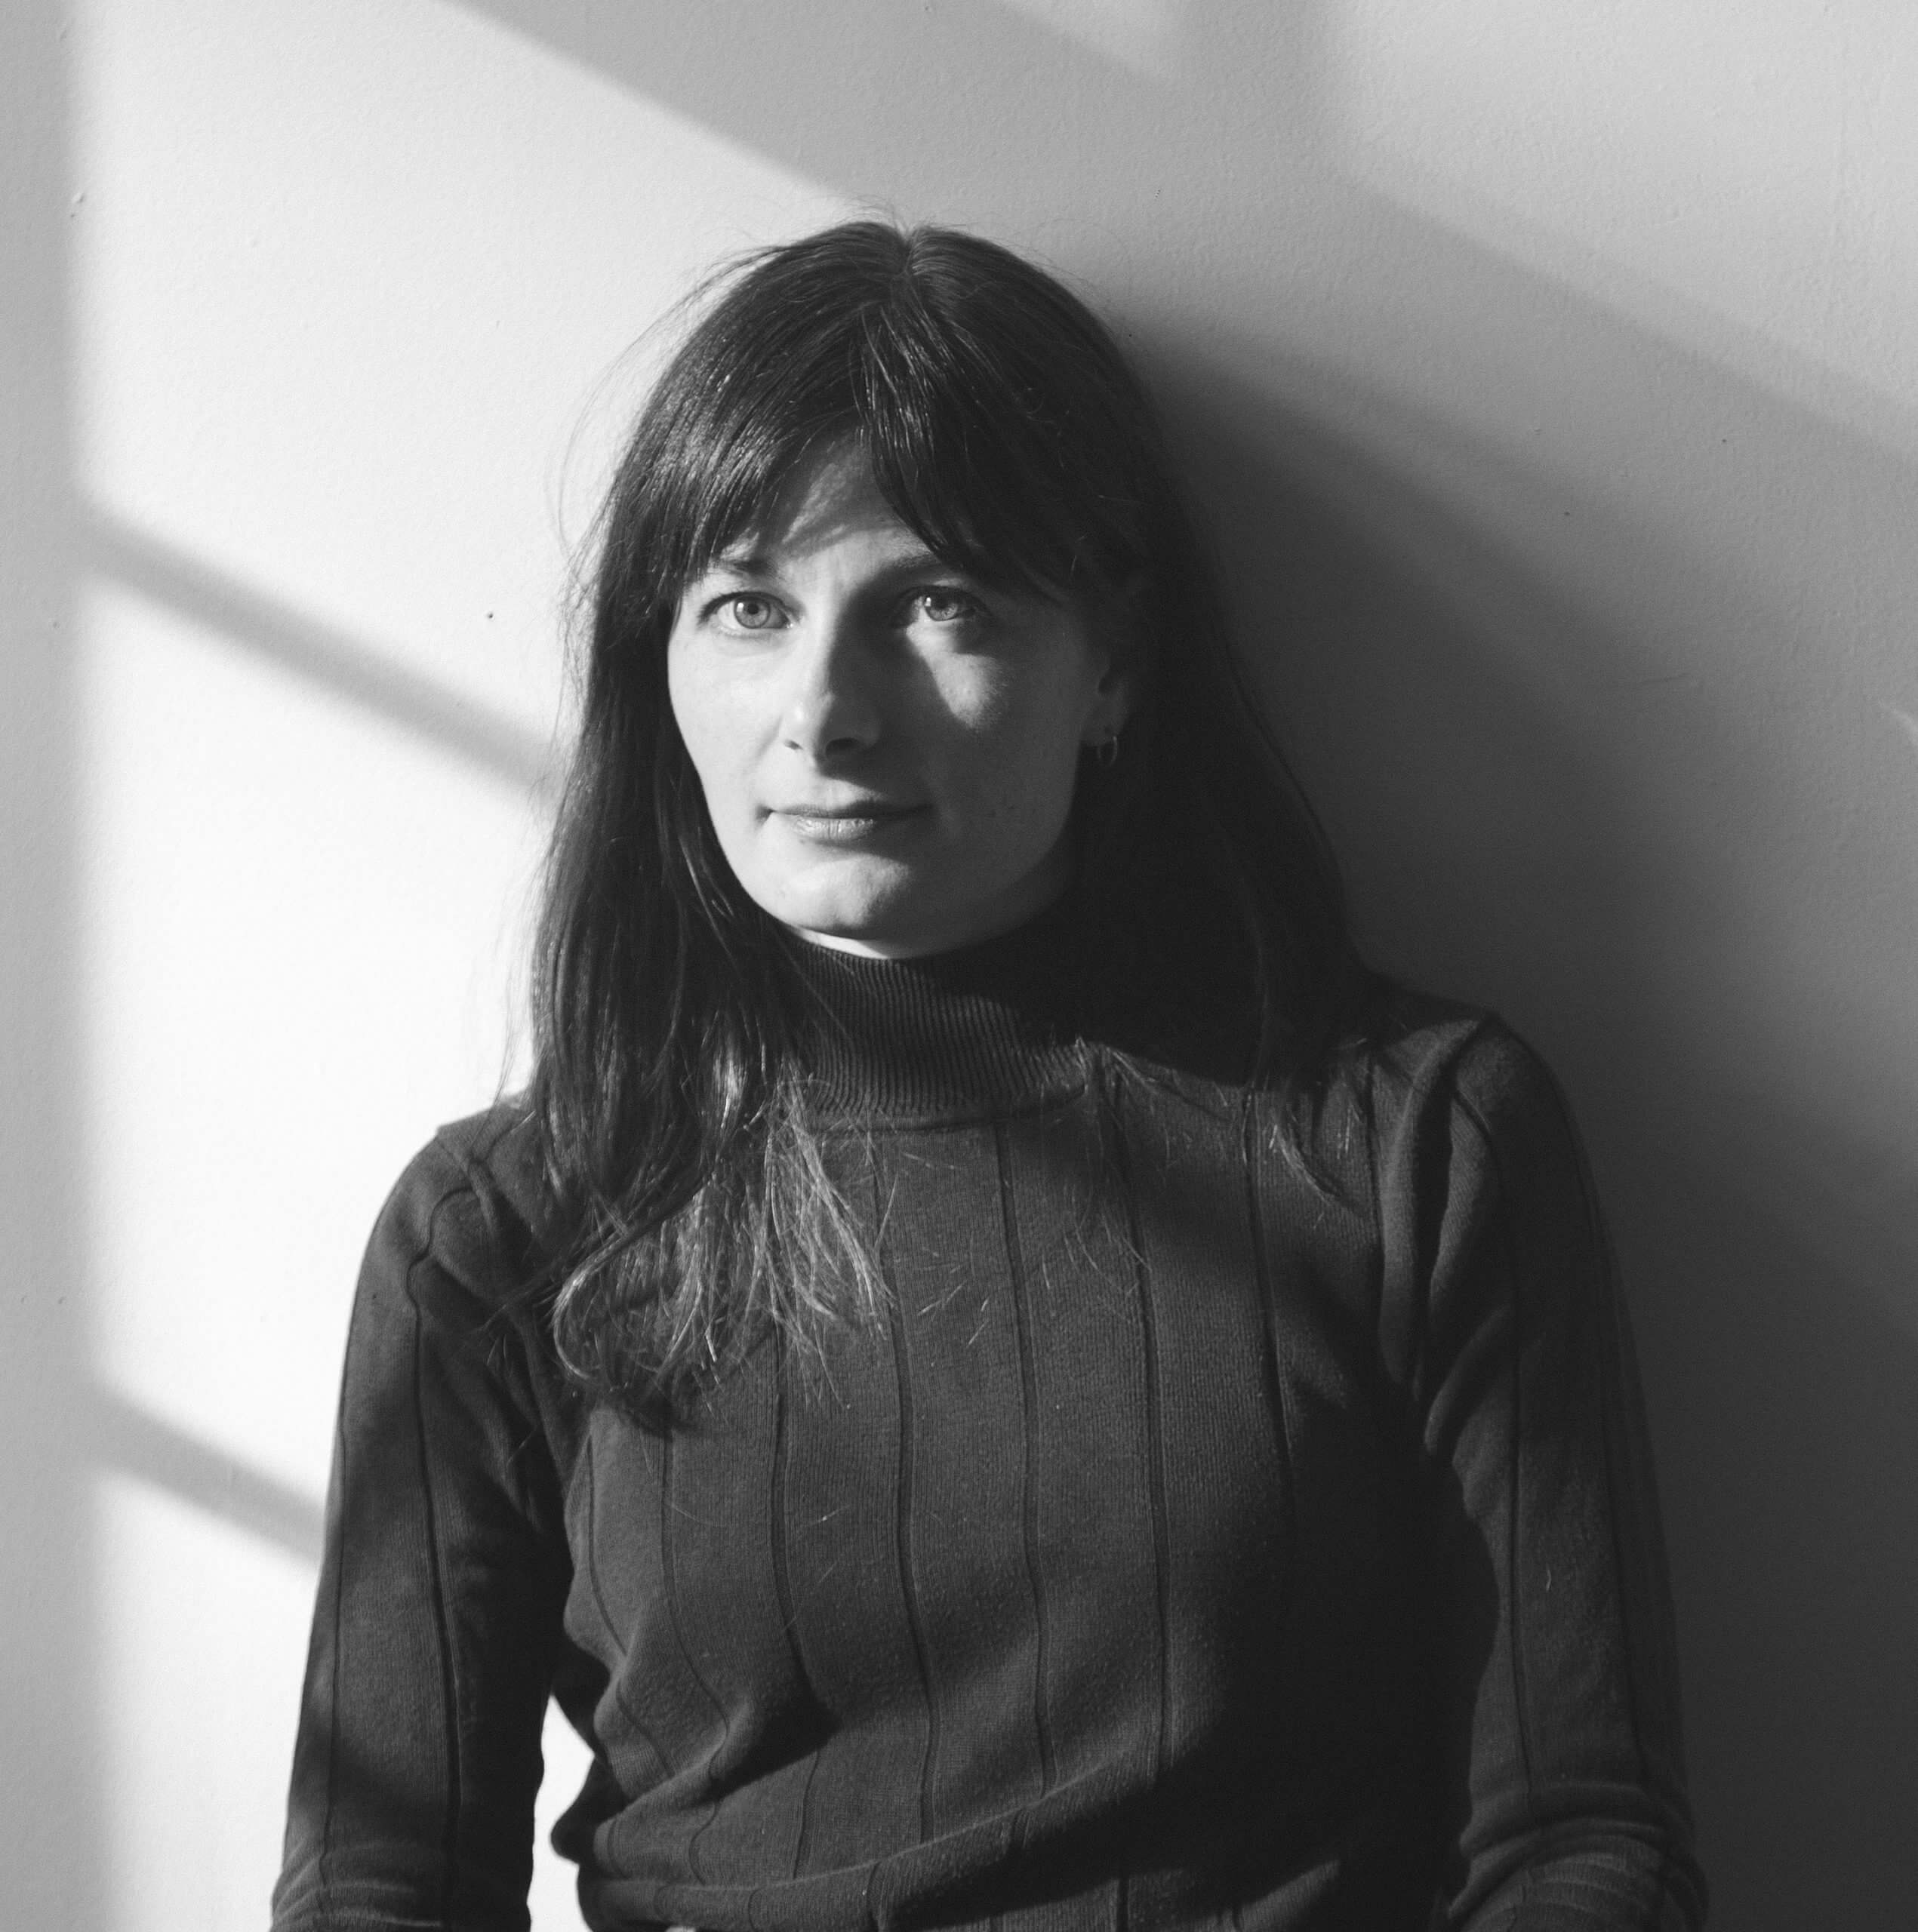 This is a headshot of Brett Story, a white woman with freckles and long brown hair and bangs. She is sitting at a table against a white wall, wearing a black turtleneck and jeans.